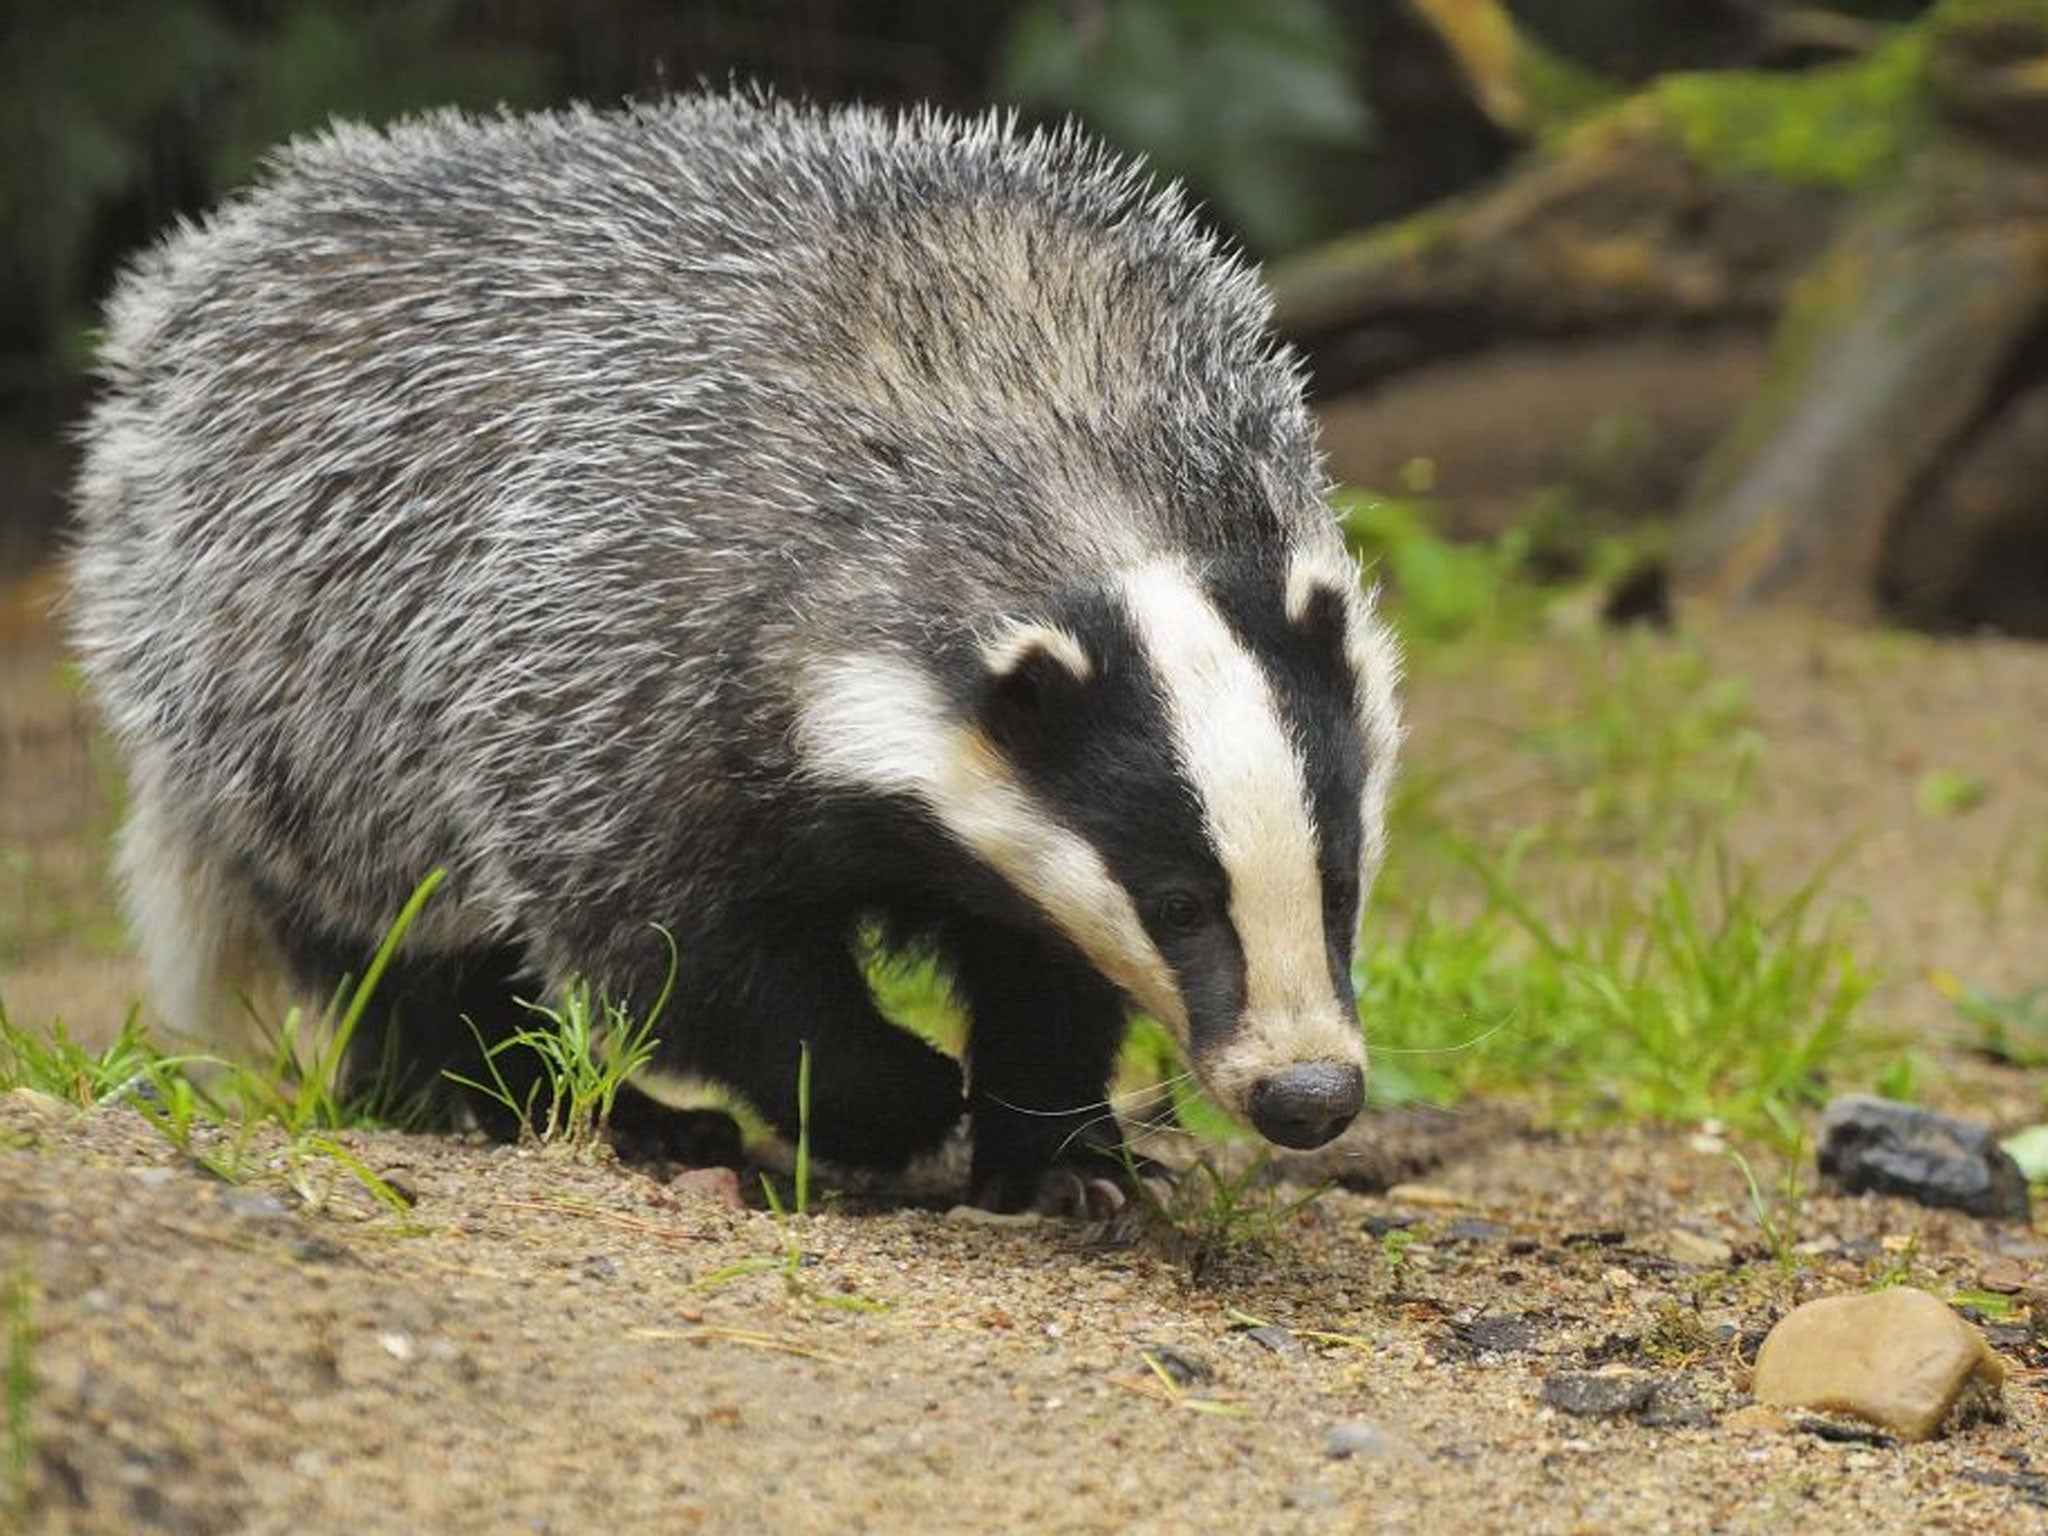 Activists plan to shadow shooting parties with vuvuzelas to scare badgers away